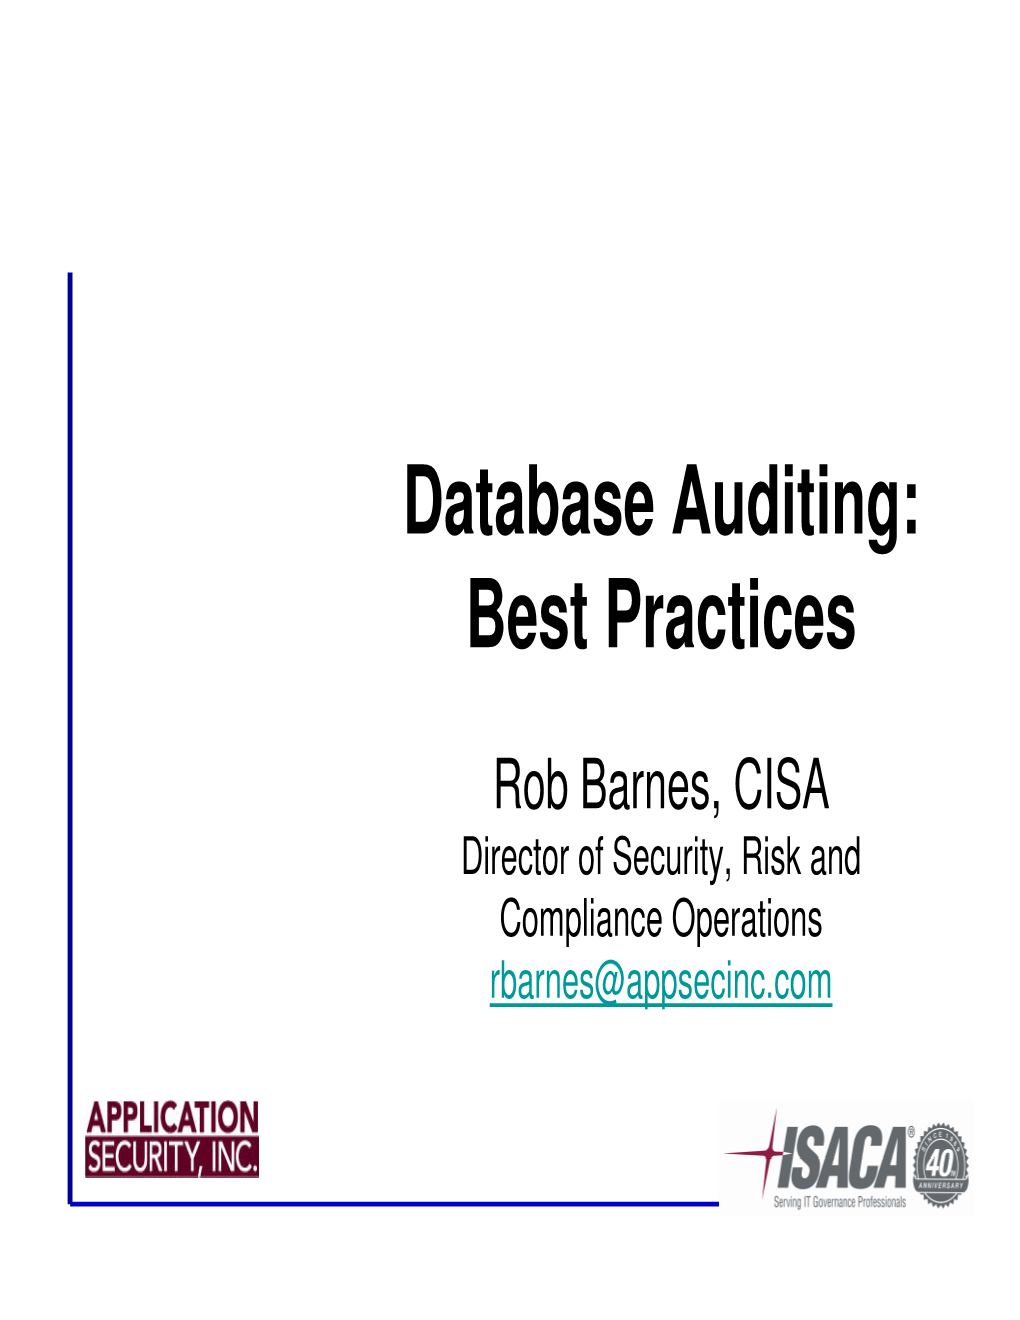 Database Auditing: Best Practices